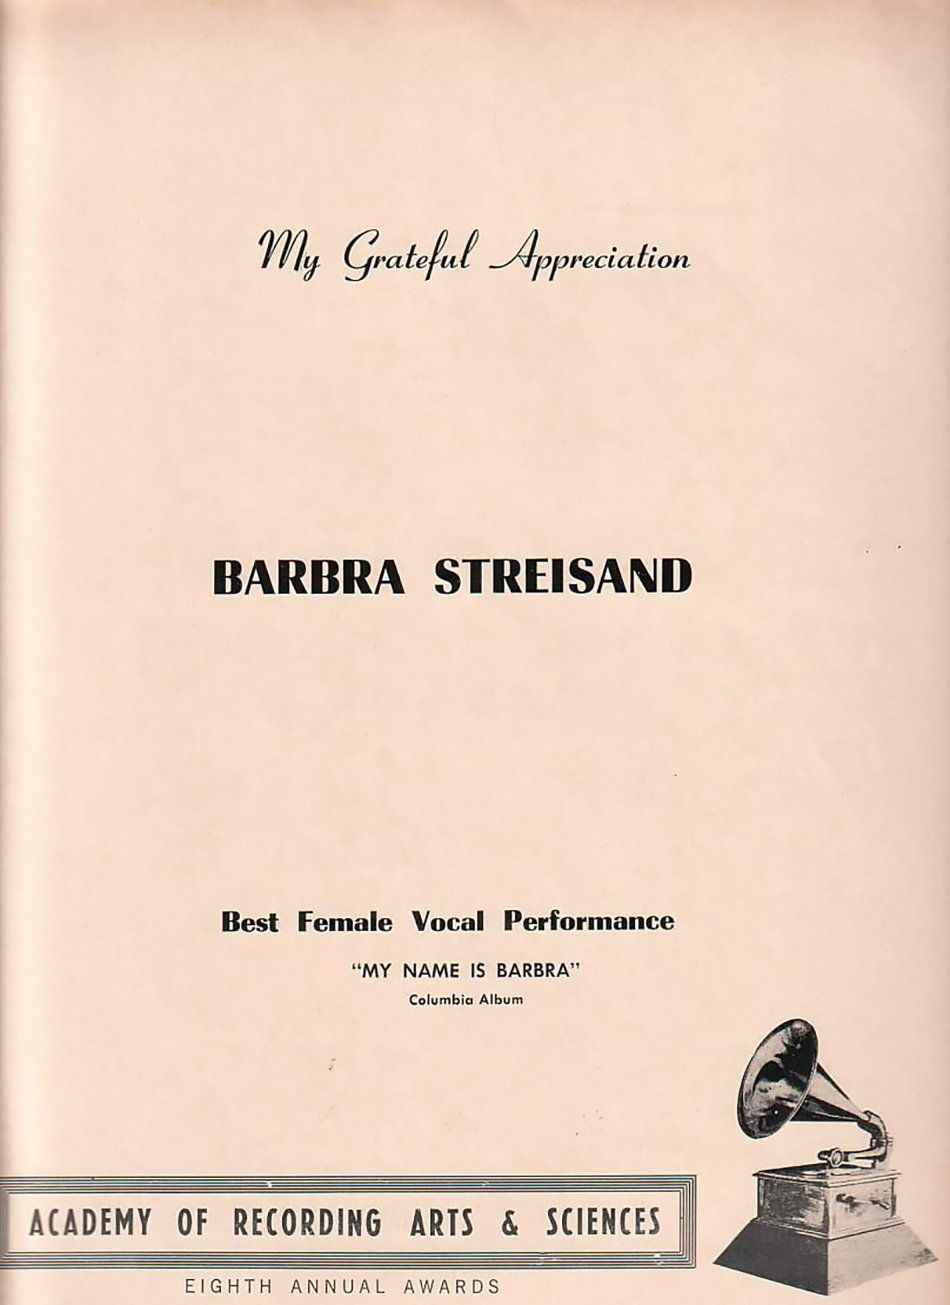 Industry ad of thanks for a Grammy, taken out by Barbra Streisand